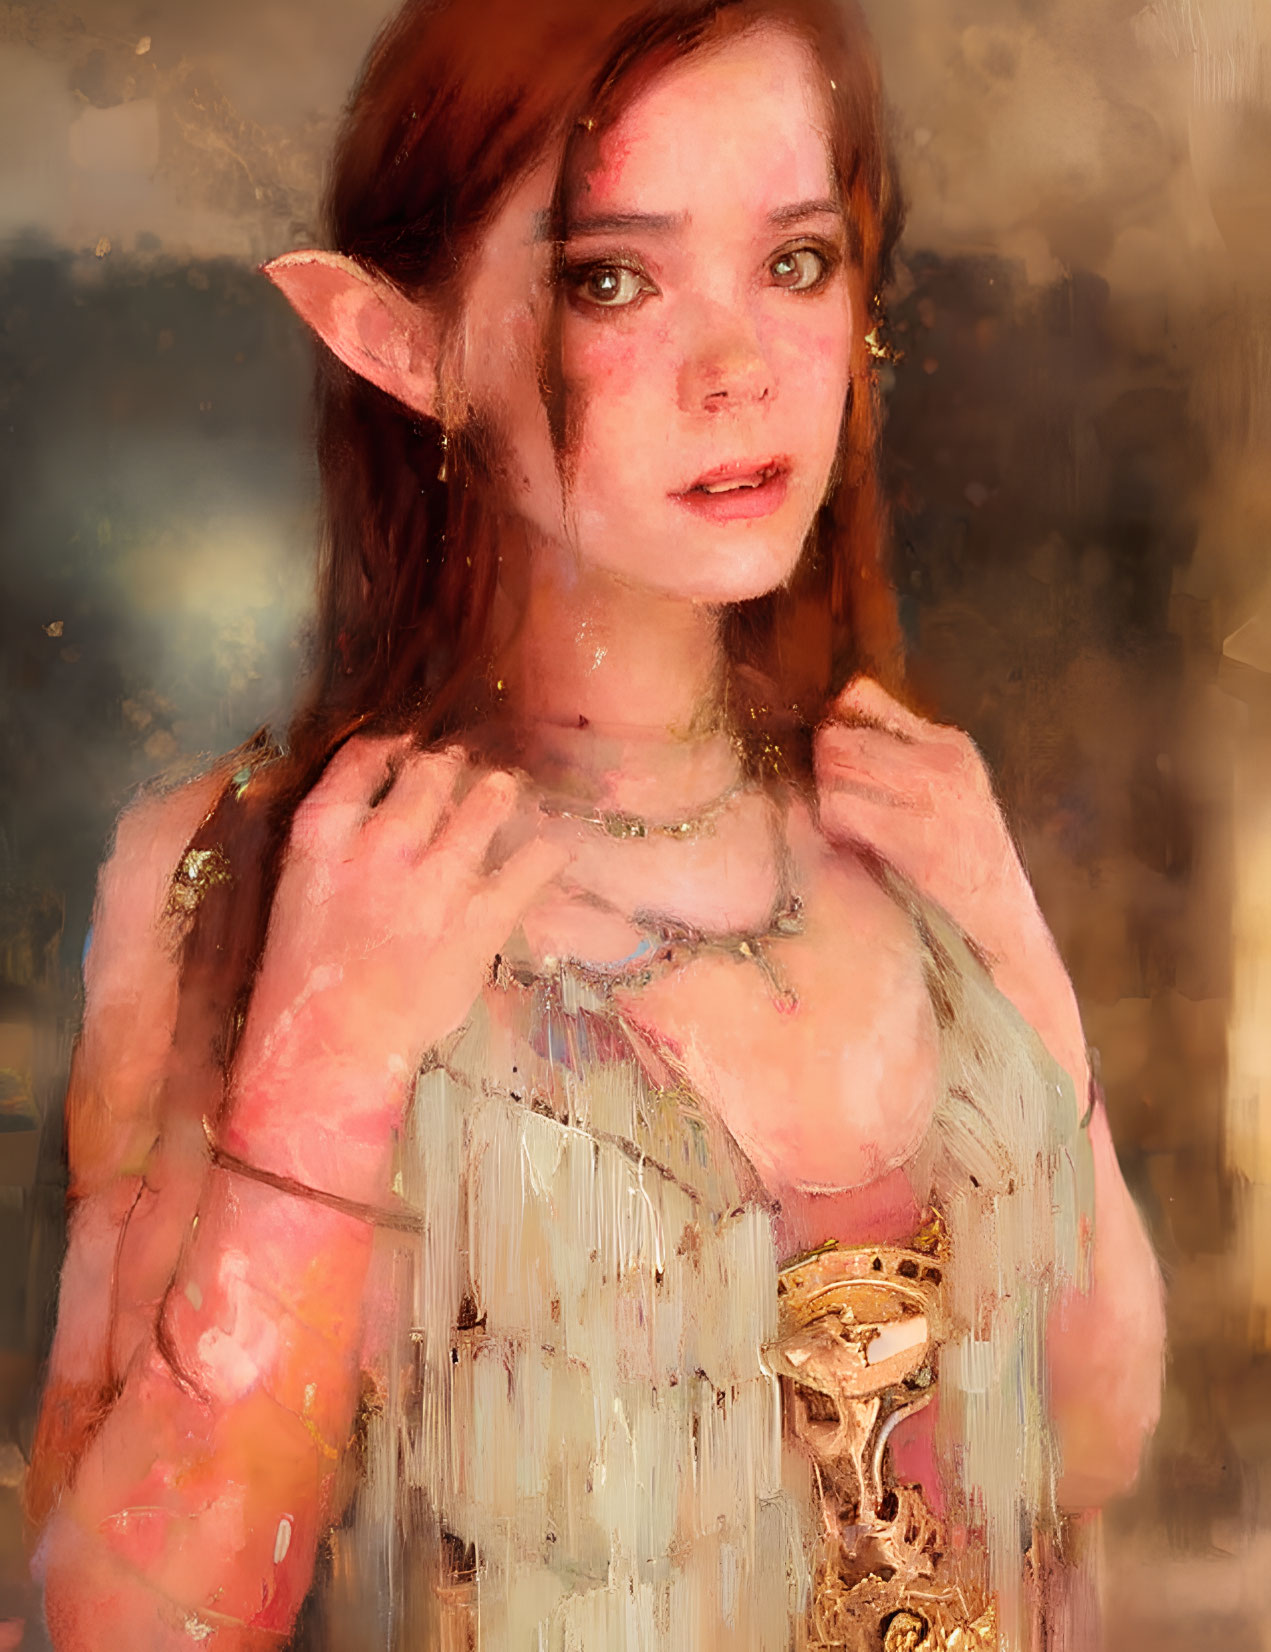 Character portrait: elf-eared, red-haired figure in fantasy attire with golden accents on warm-toned